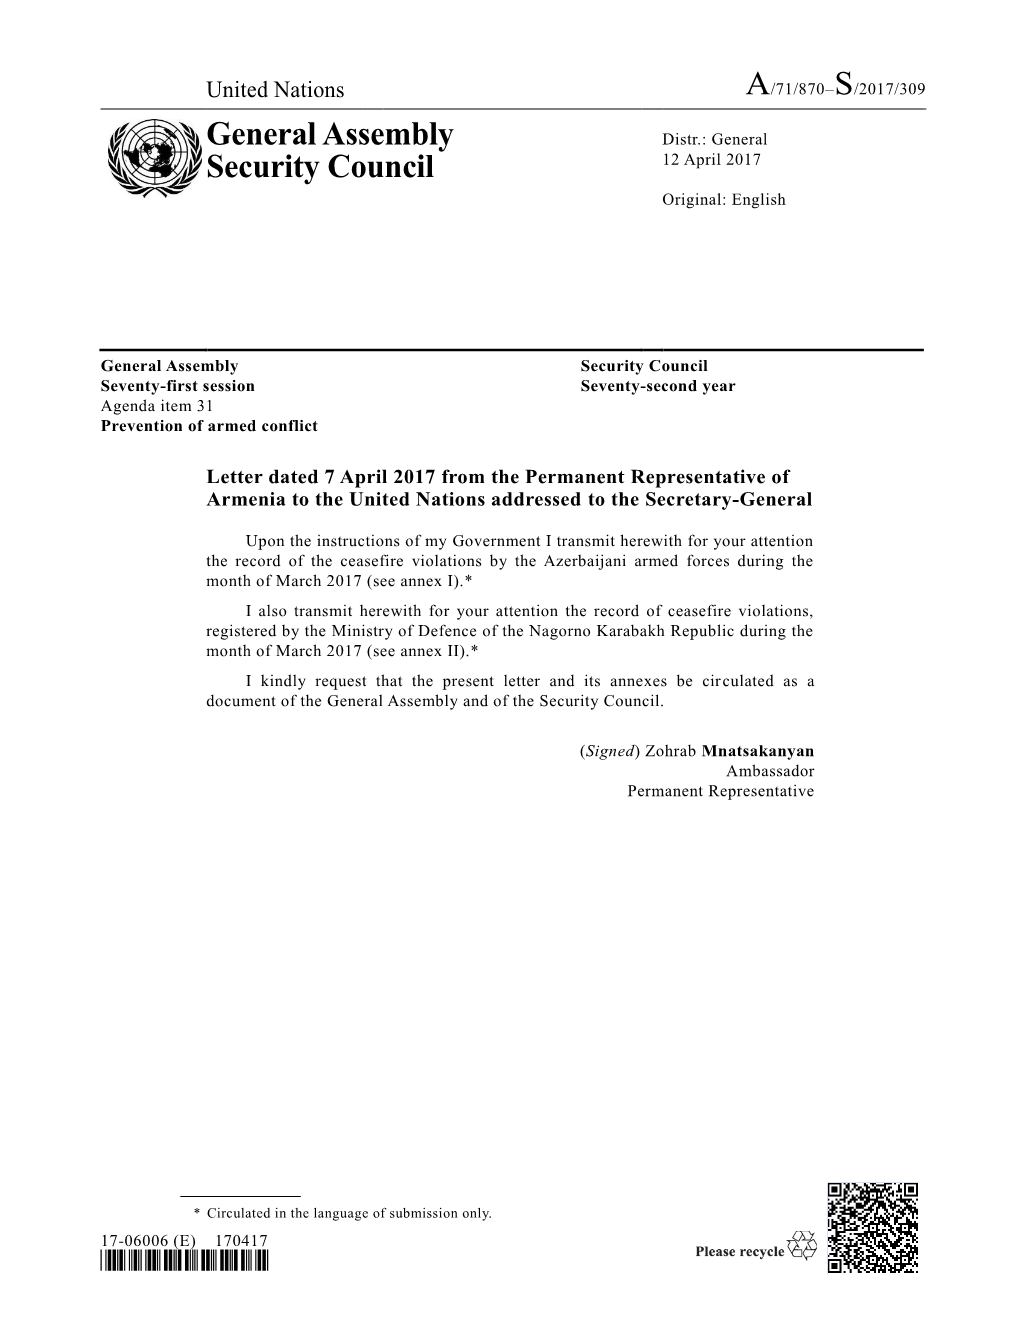 General Assembly Security Council Seventy-First Session Seventy-Second Year Agenda Item 31 Prevention of Armed Conflict